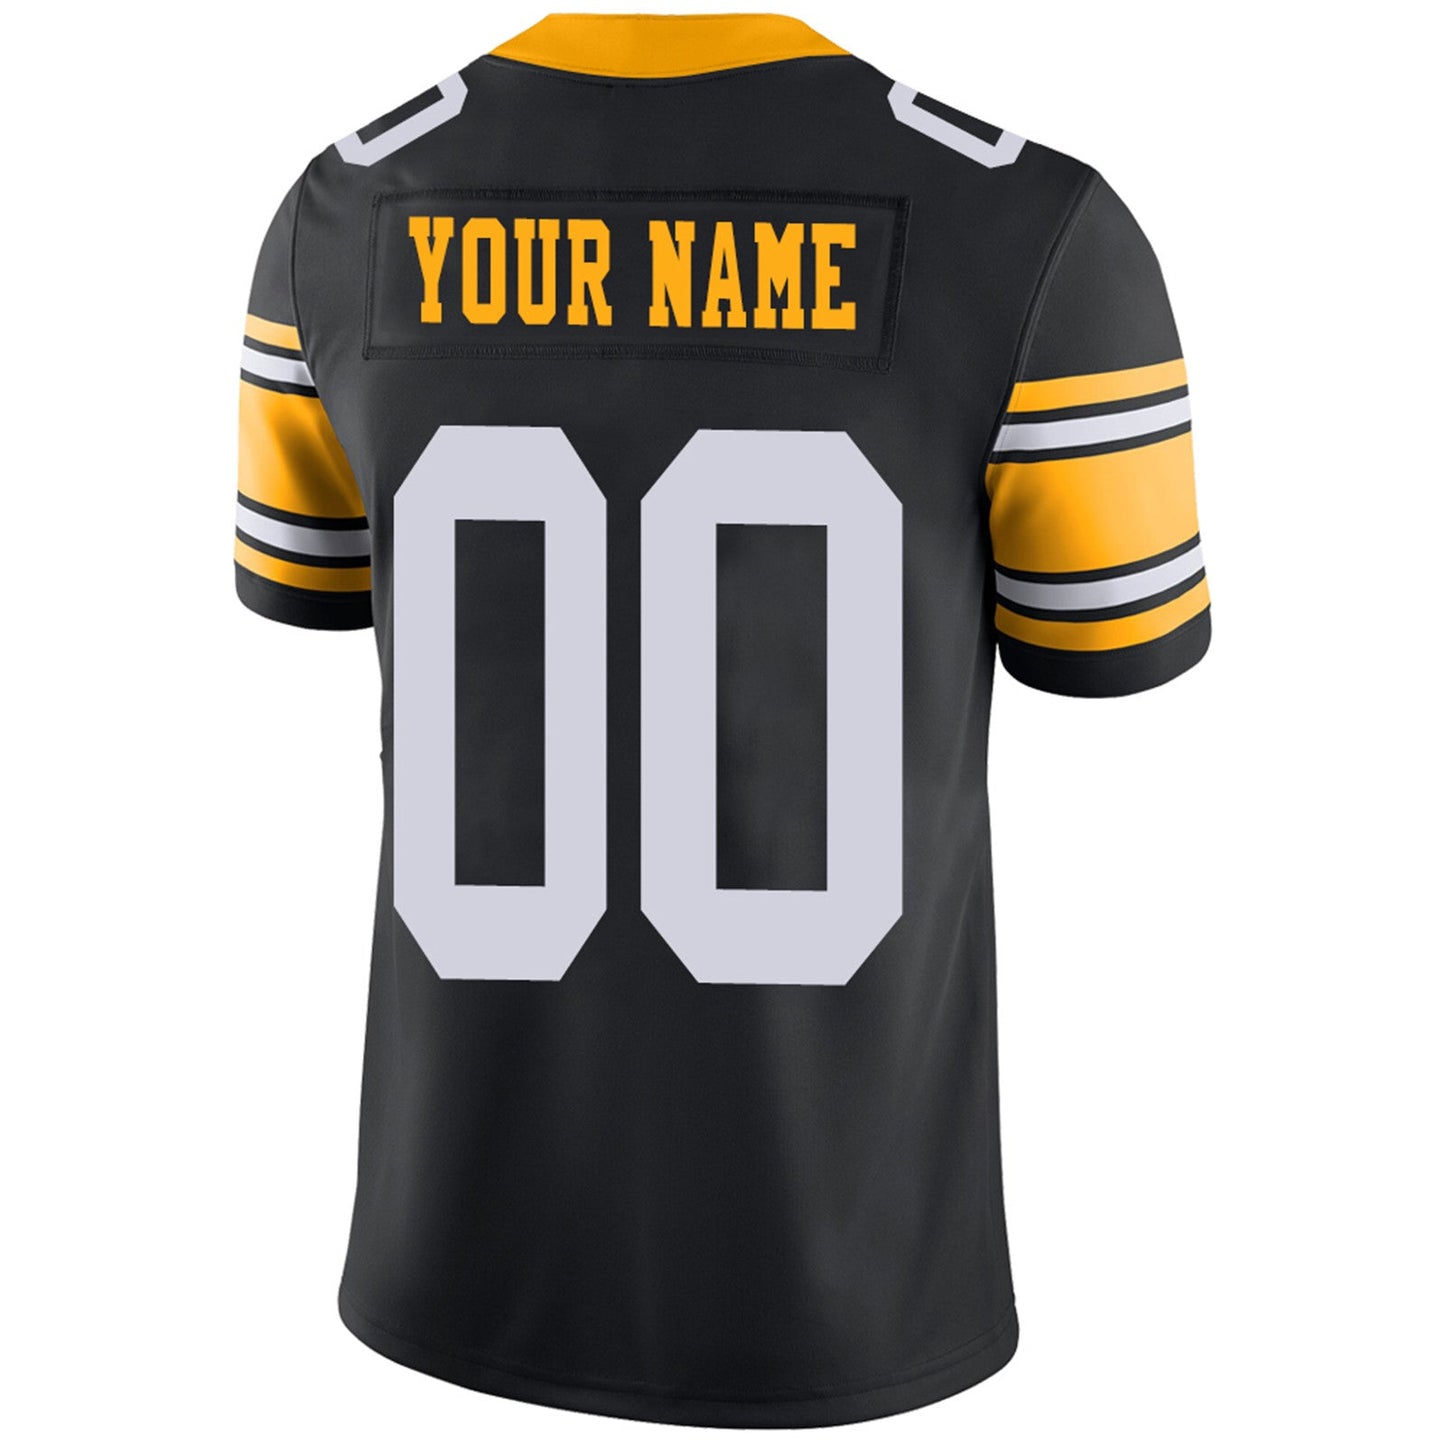 Custom P.Steelers Football Jerseys Team Player or Personalized Design Your Own Name for Men's Women's Youth Jerseys Black